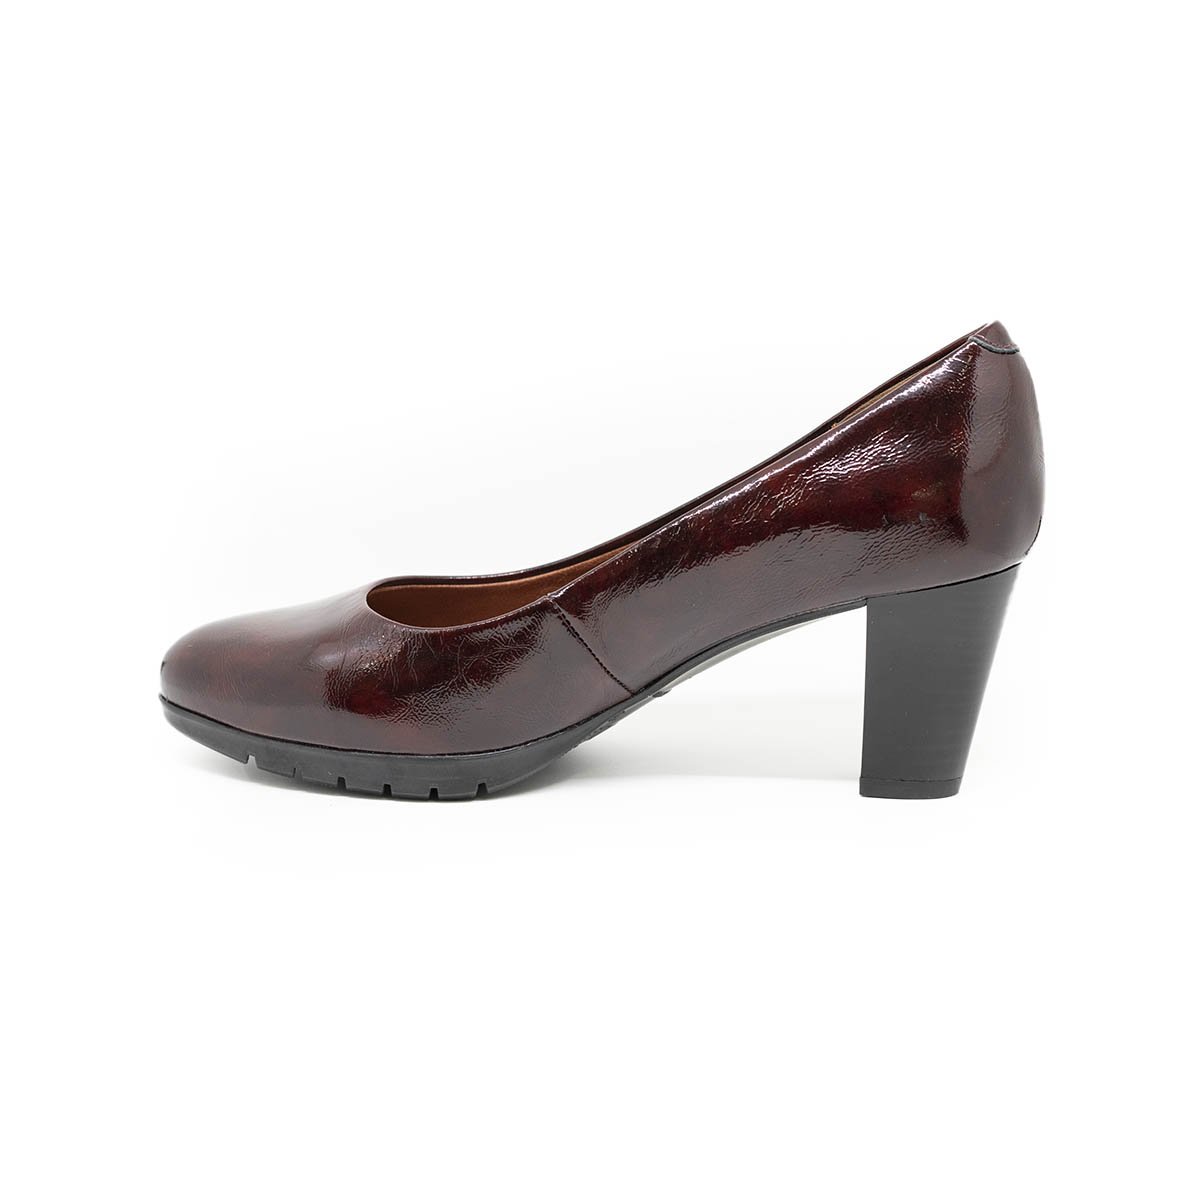 Desiree Shoes Davine - Clearance Shoes  Available at Illusions Lingerie